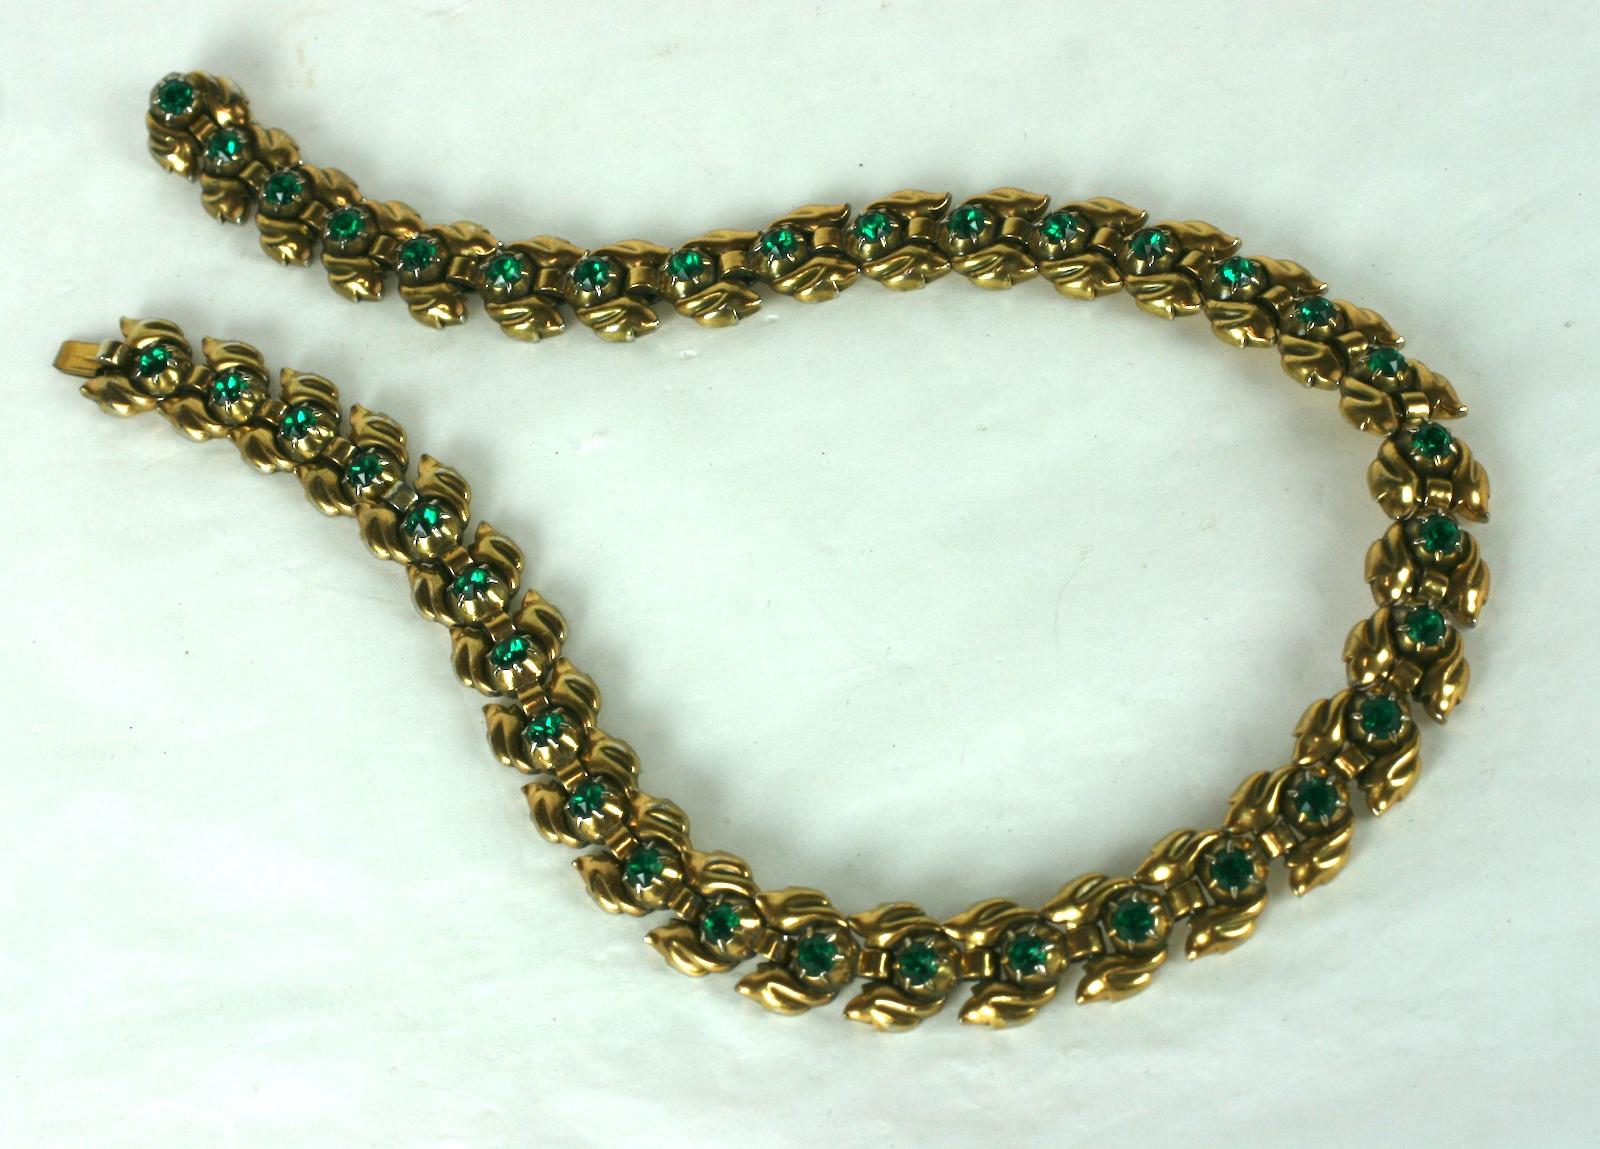 Trifari Eugenie Faux Emerald Necklace set in green gold plate from the 1940's. Each foliate link is set with an emerald crystal which repeats throughout this supple link necklace.  1940's USA. 
16